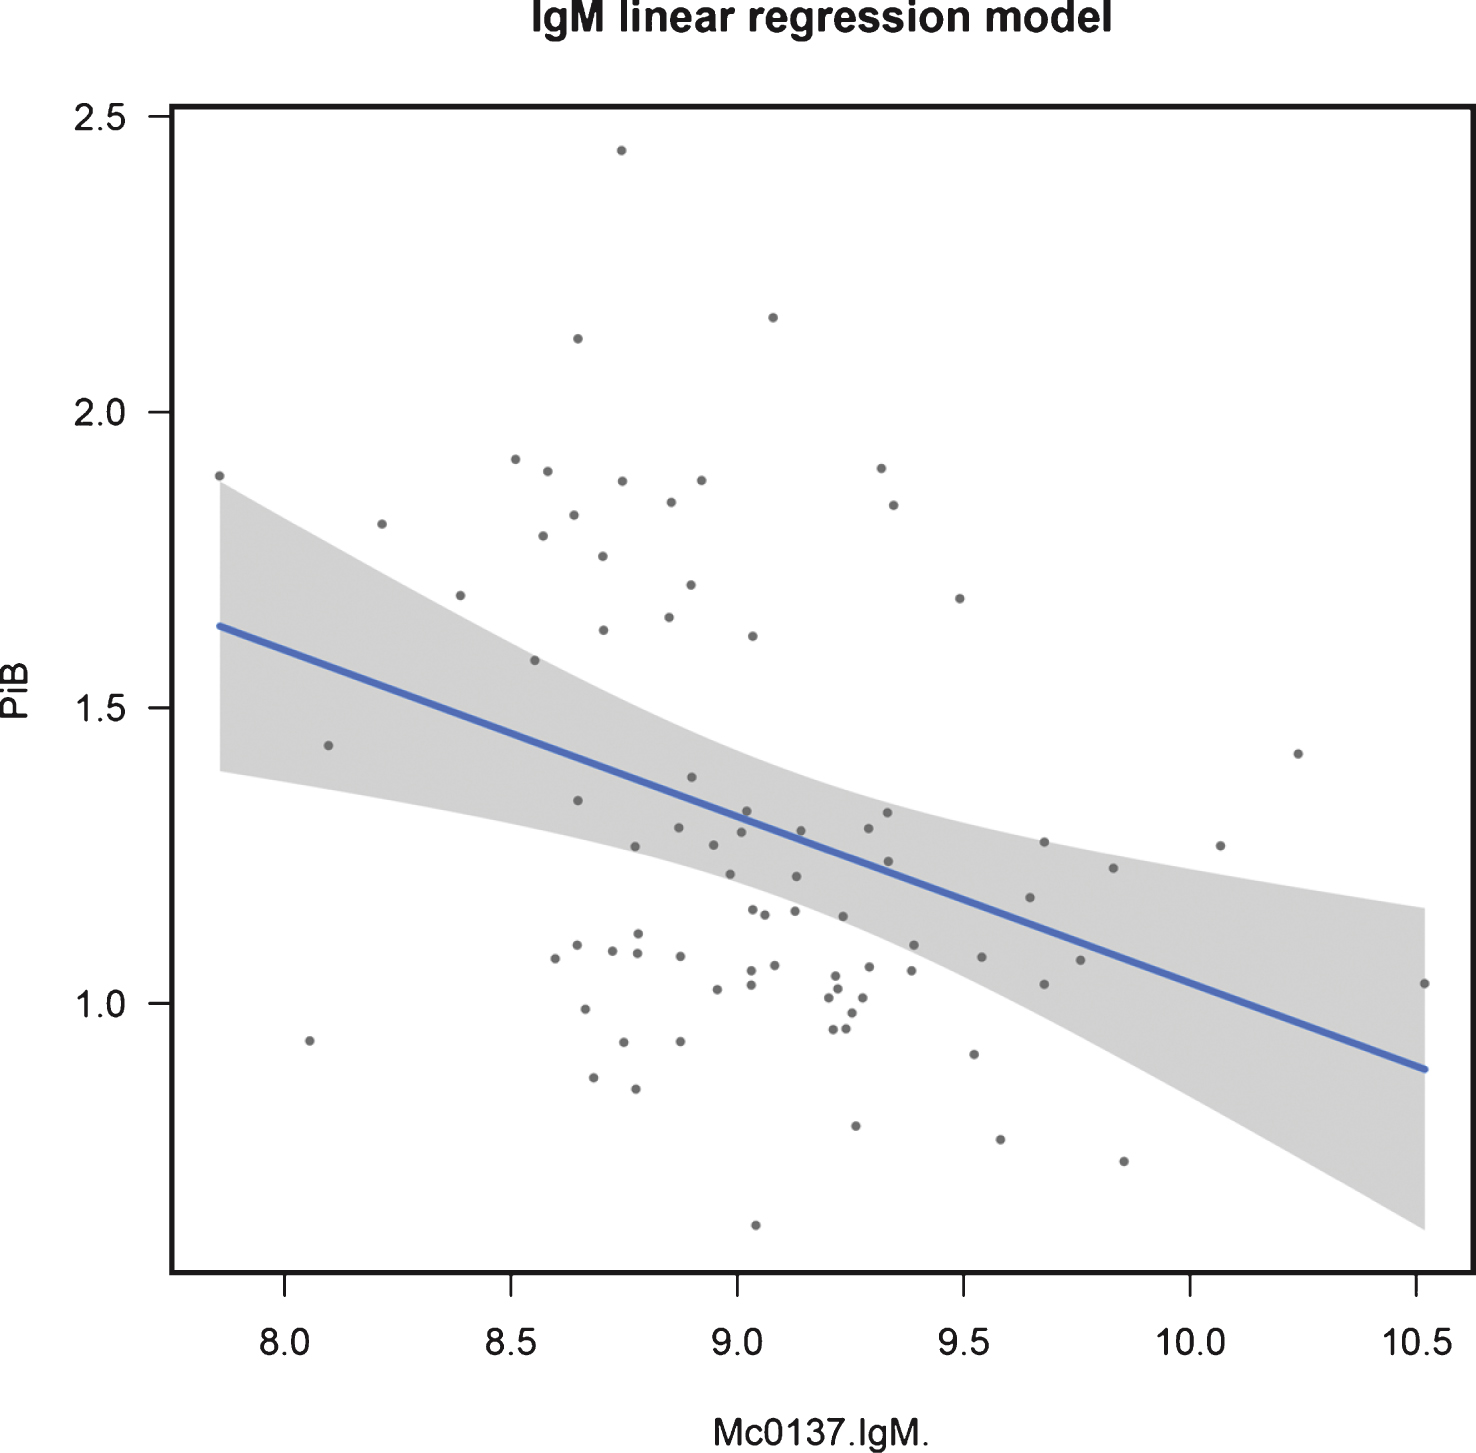 Regression fit for IgM modeling continuous NAB in control samples: training data.